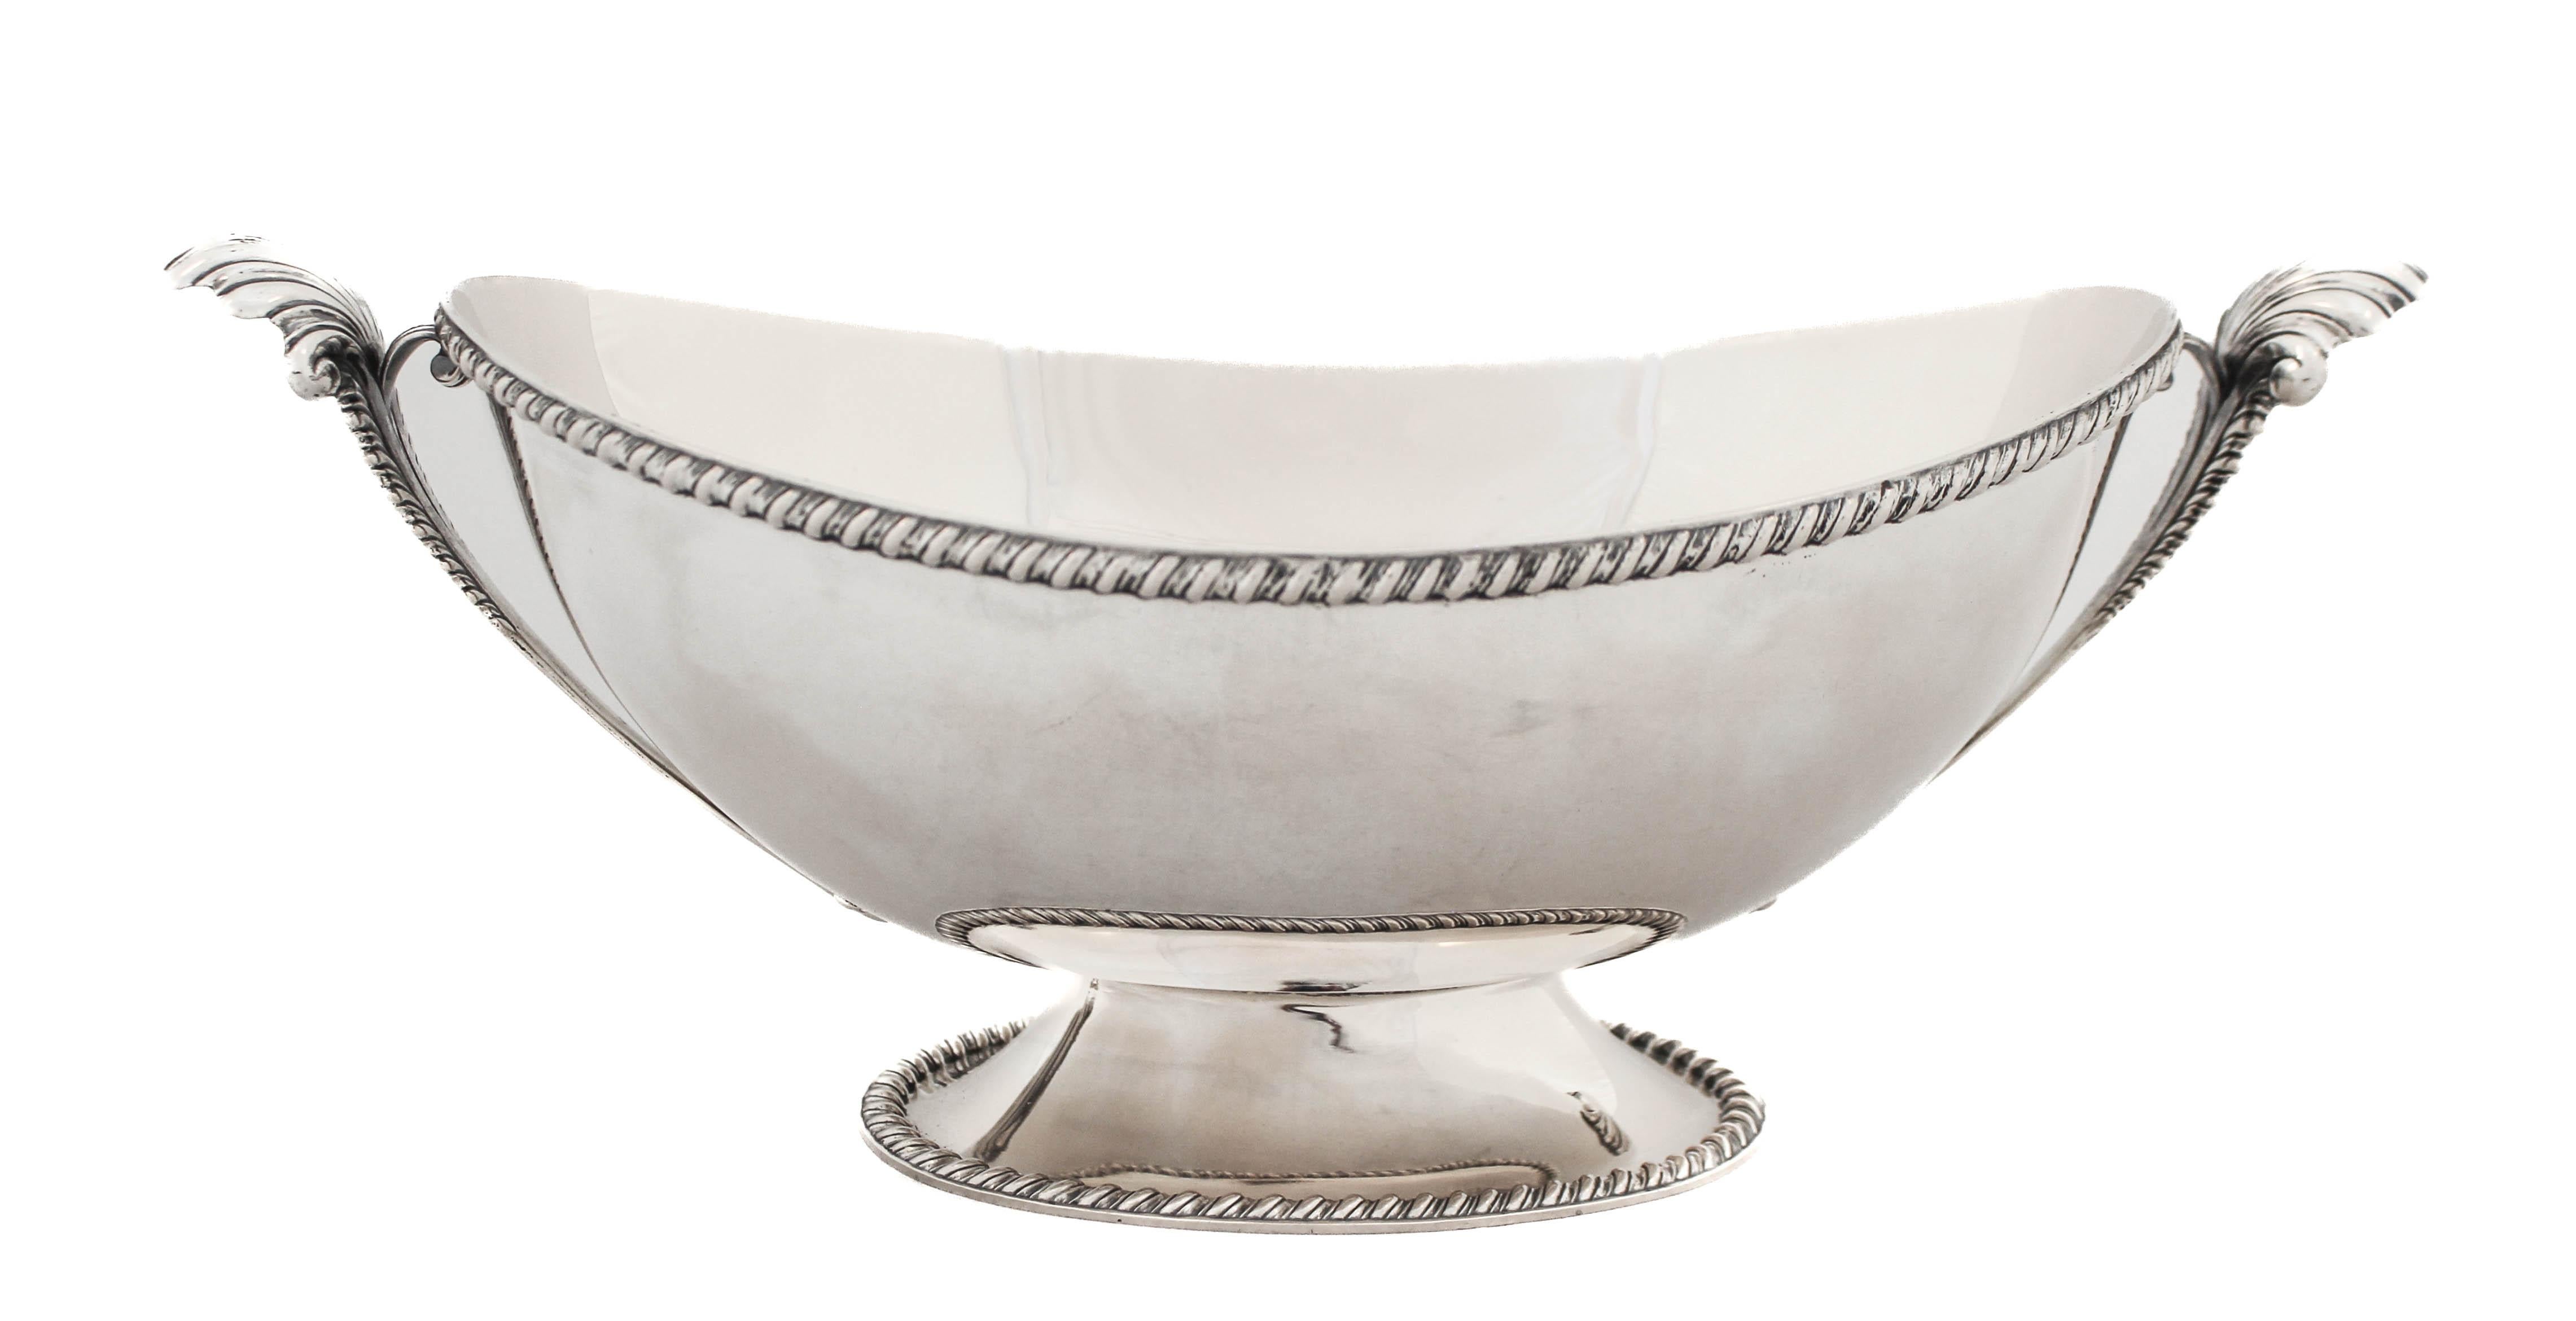 Being offered is a sterling silver centerpiece made in Austria.  It has a gadroon design around the base as well as the top rim.  Two handles in each end have a decorative shell on the top.  The shells curve outwards complimenting the shape of the